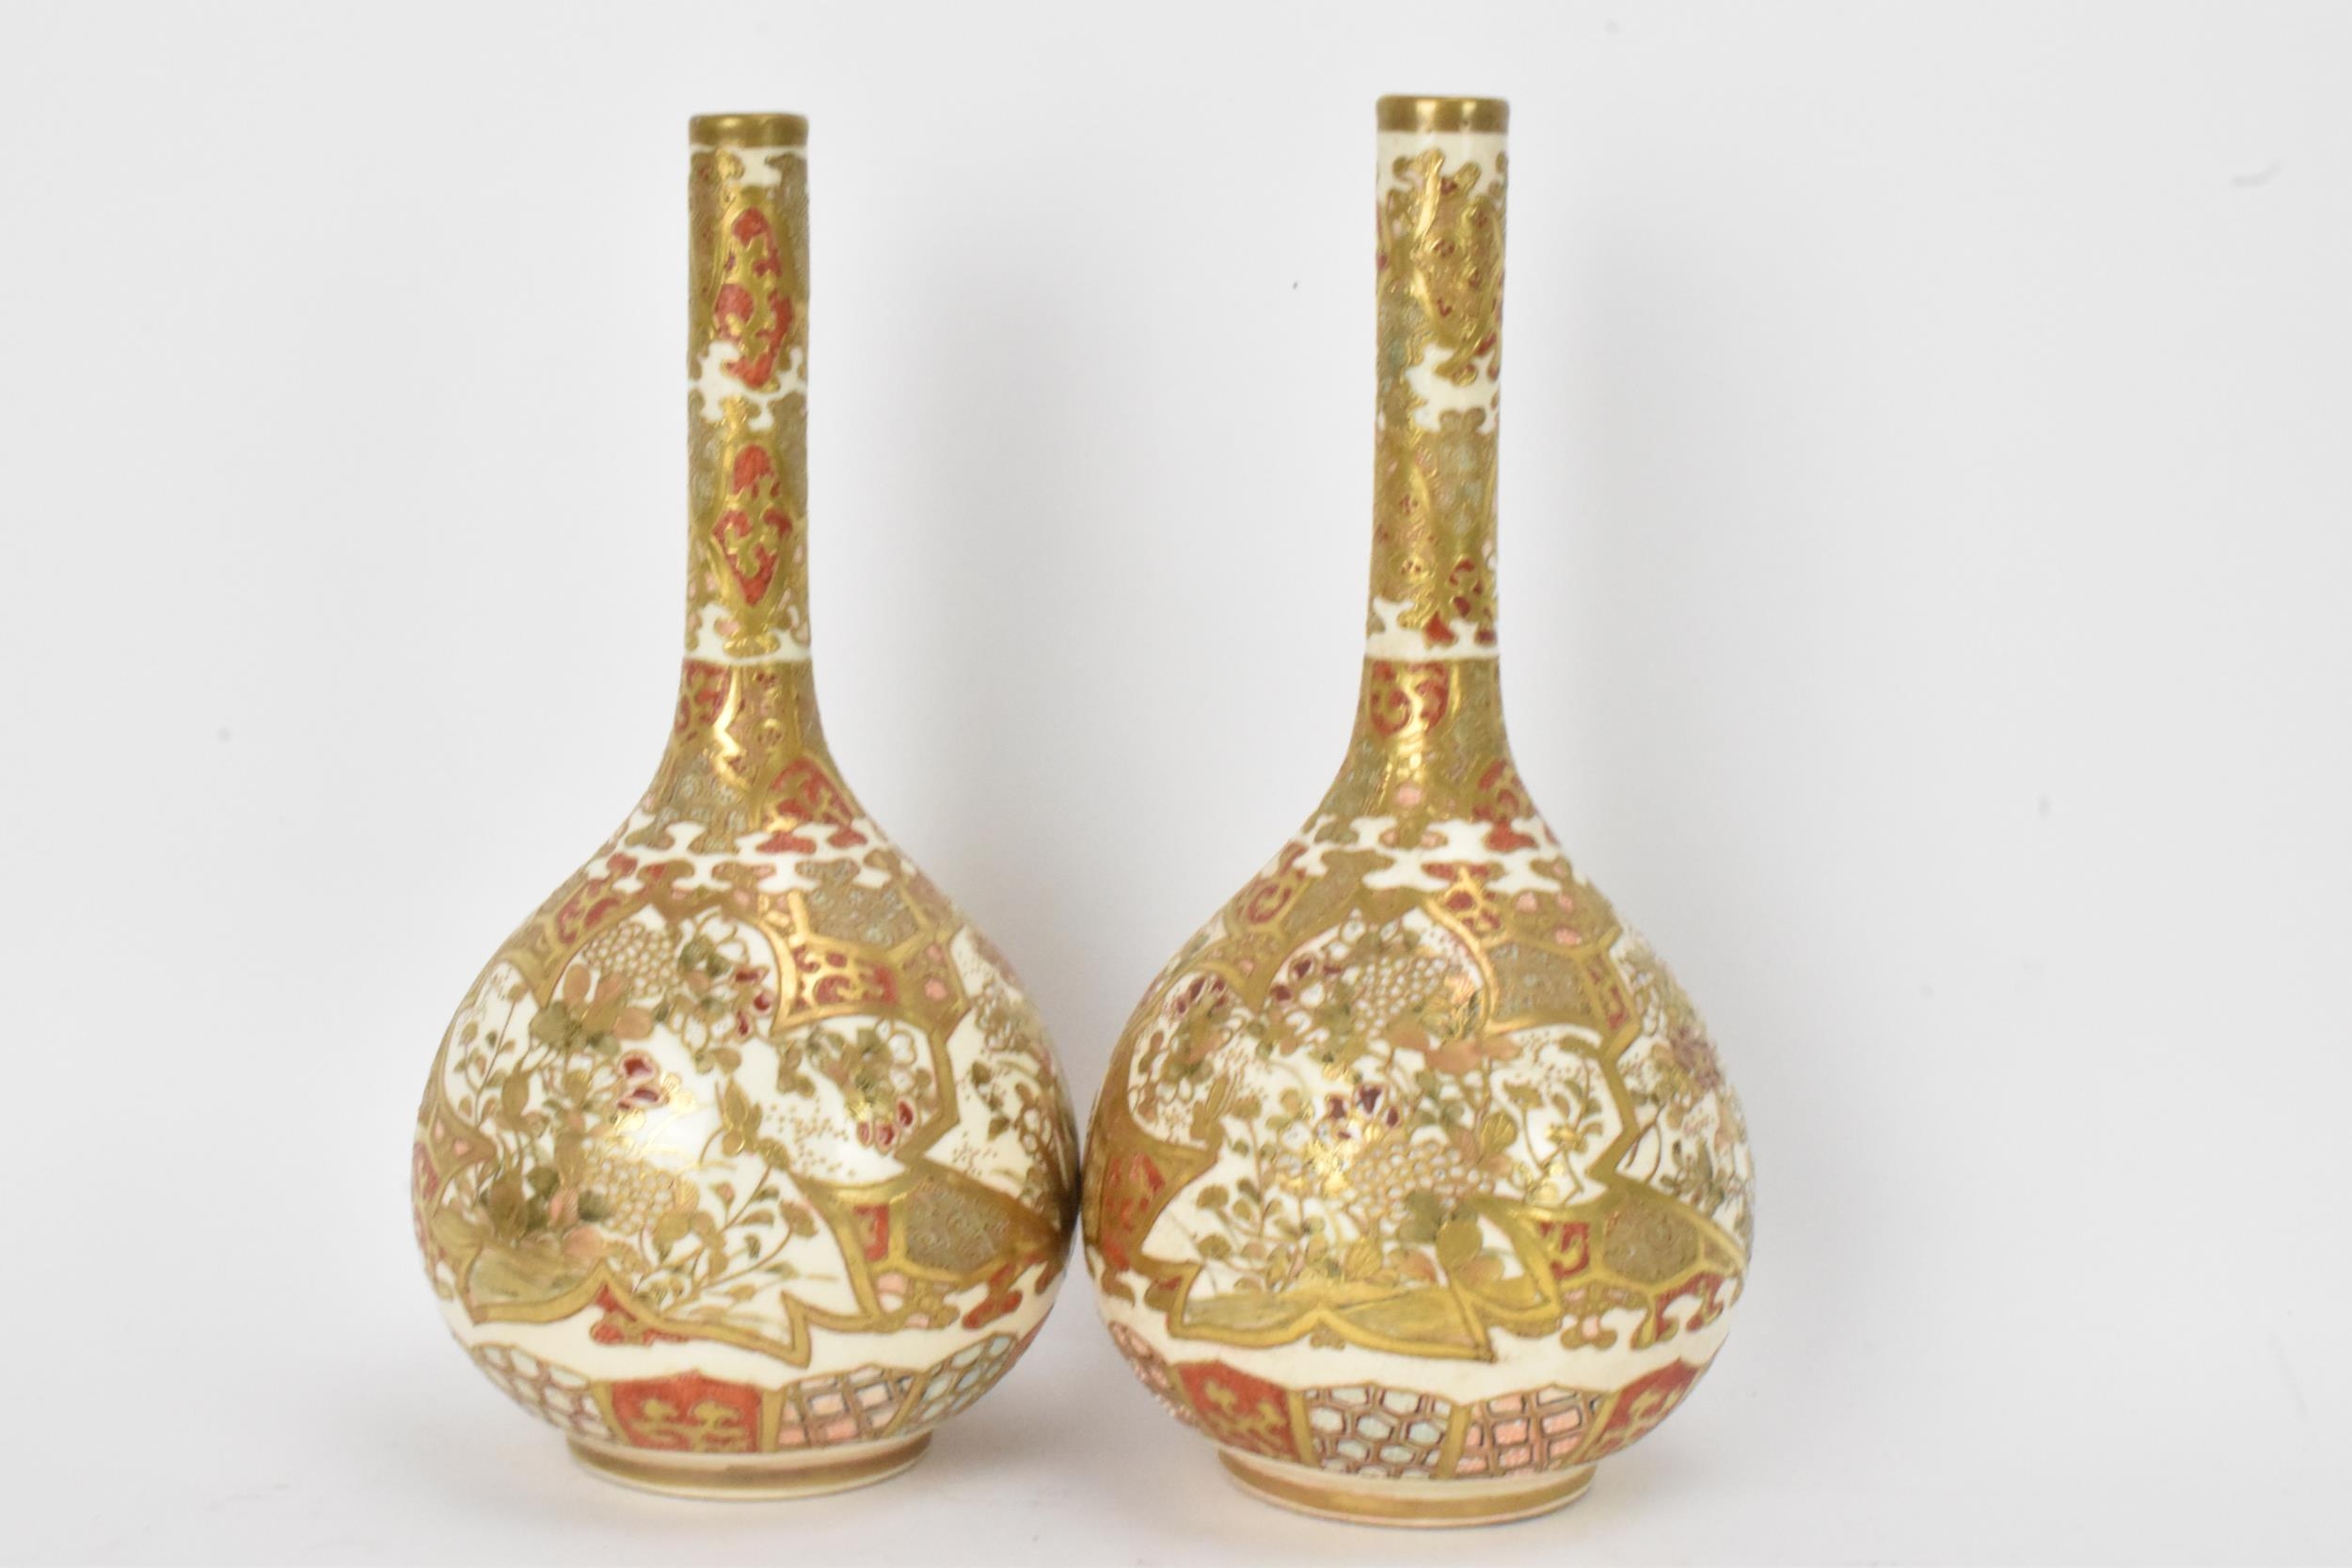 A pair of Japanese Meiji period satsuma bottle neck vases, of onion shape with shaped cartouches - Image 3 of 6